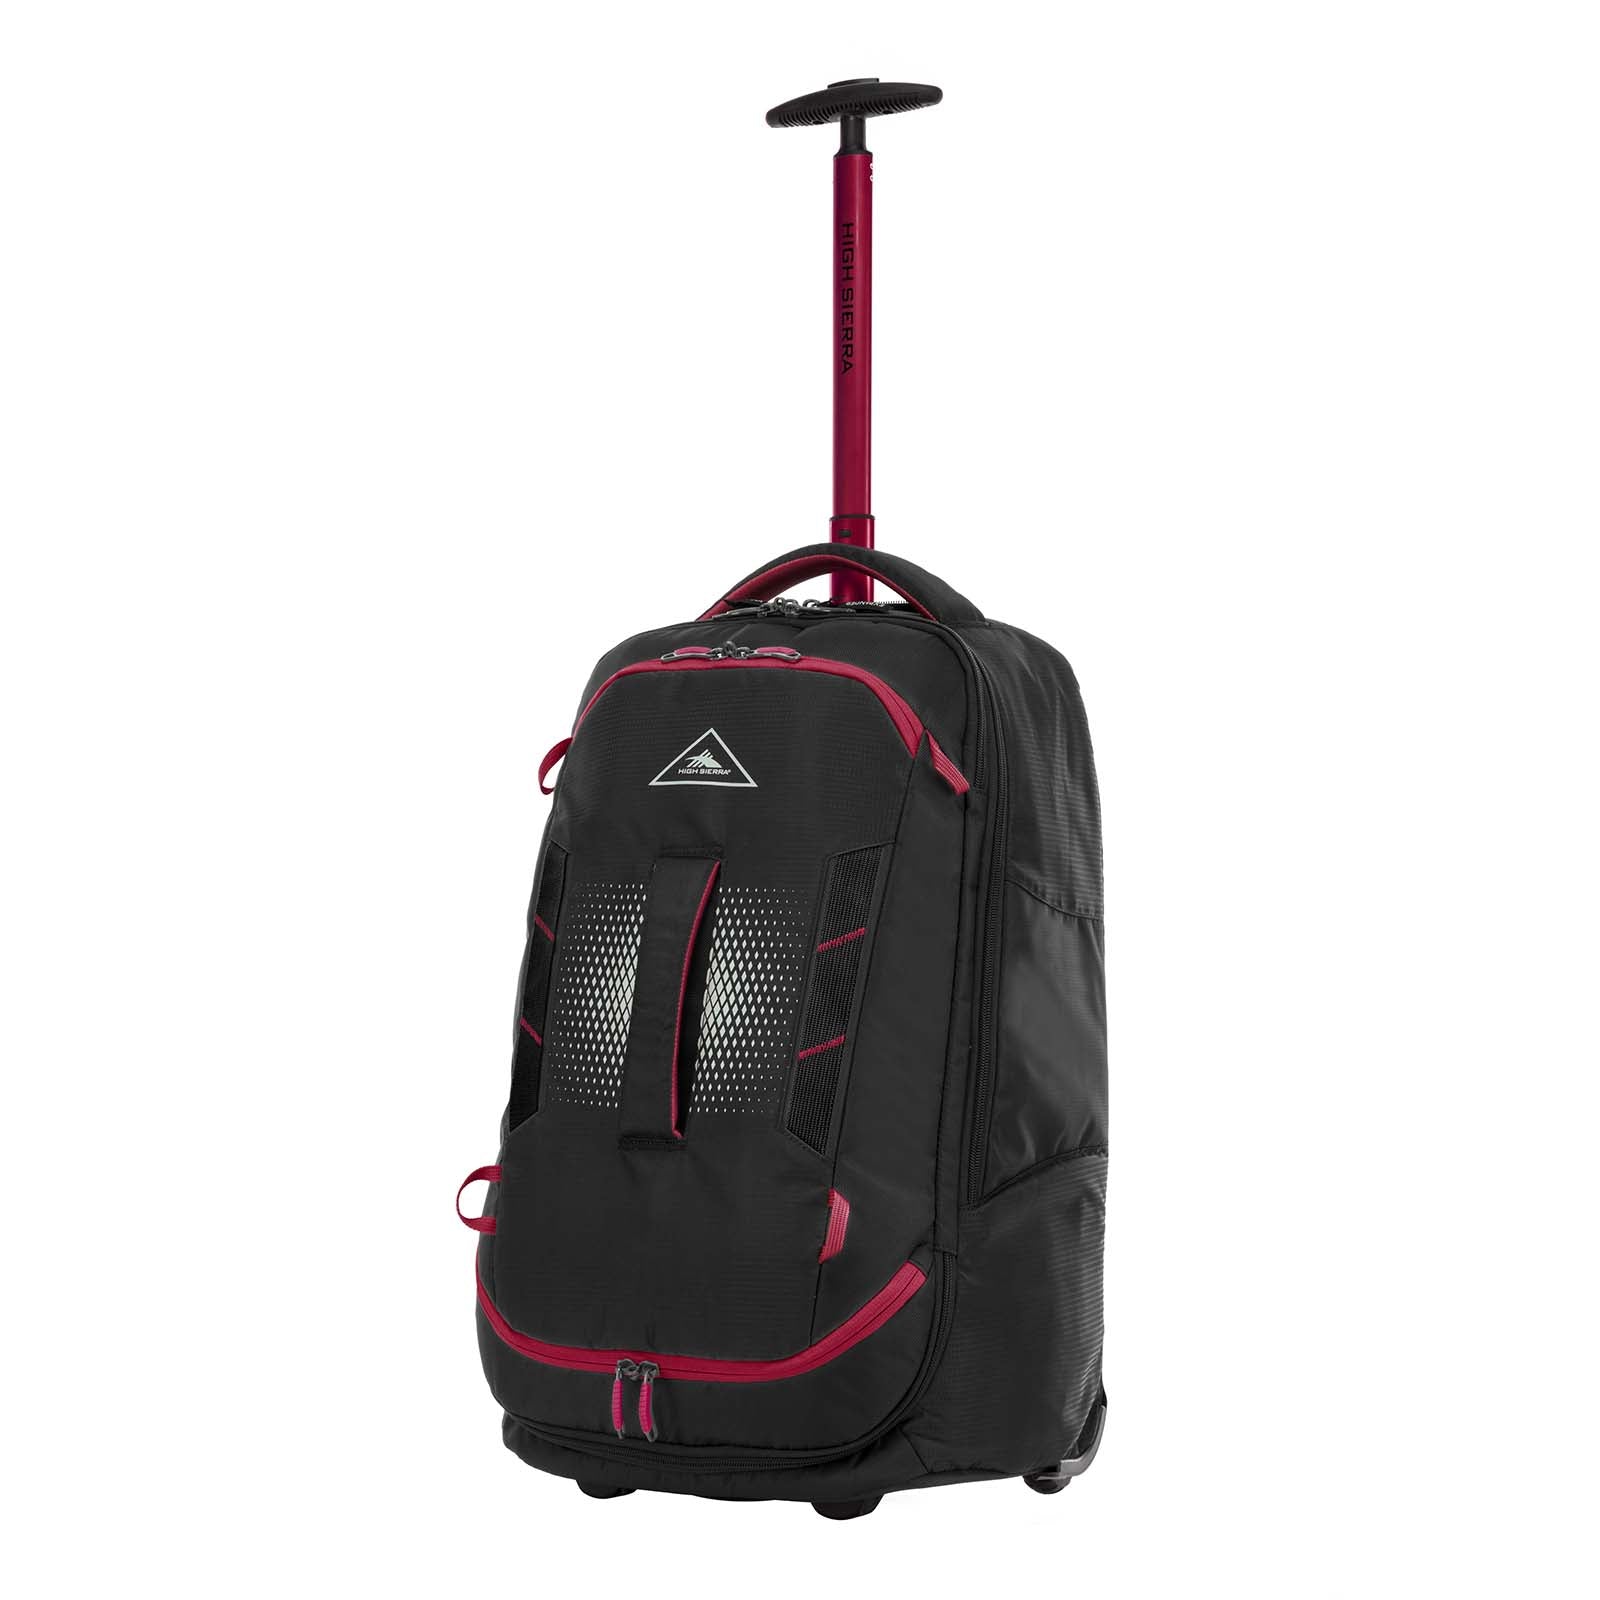     High_Sierra_Composite_V4_56cm_Carry-On_Wheeled_Duffel_Black_Red_Front